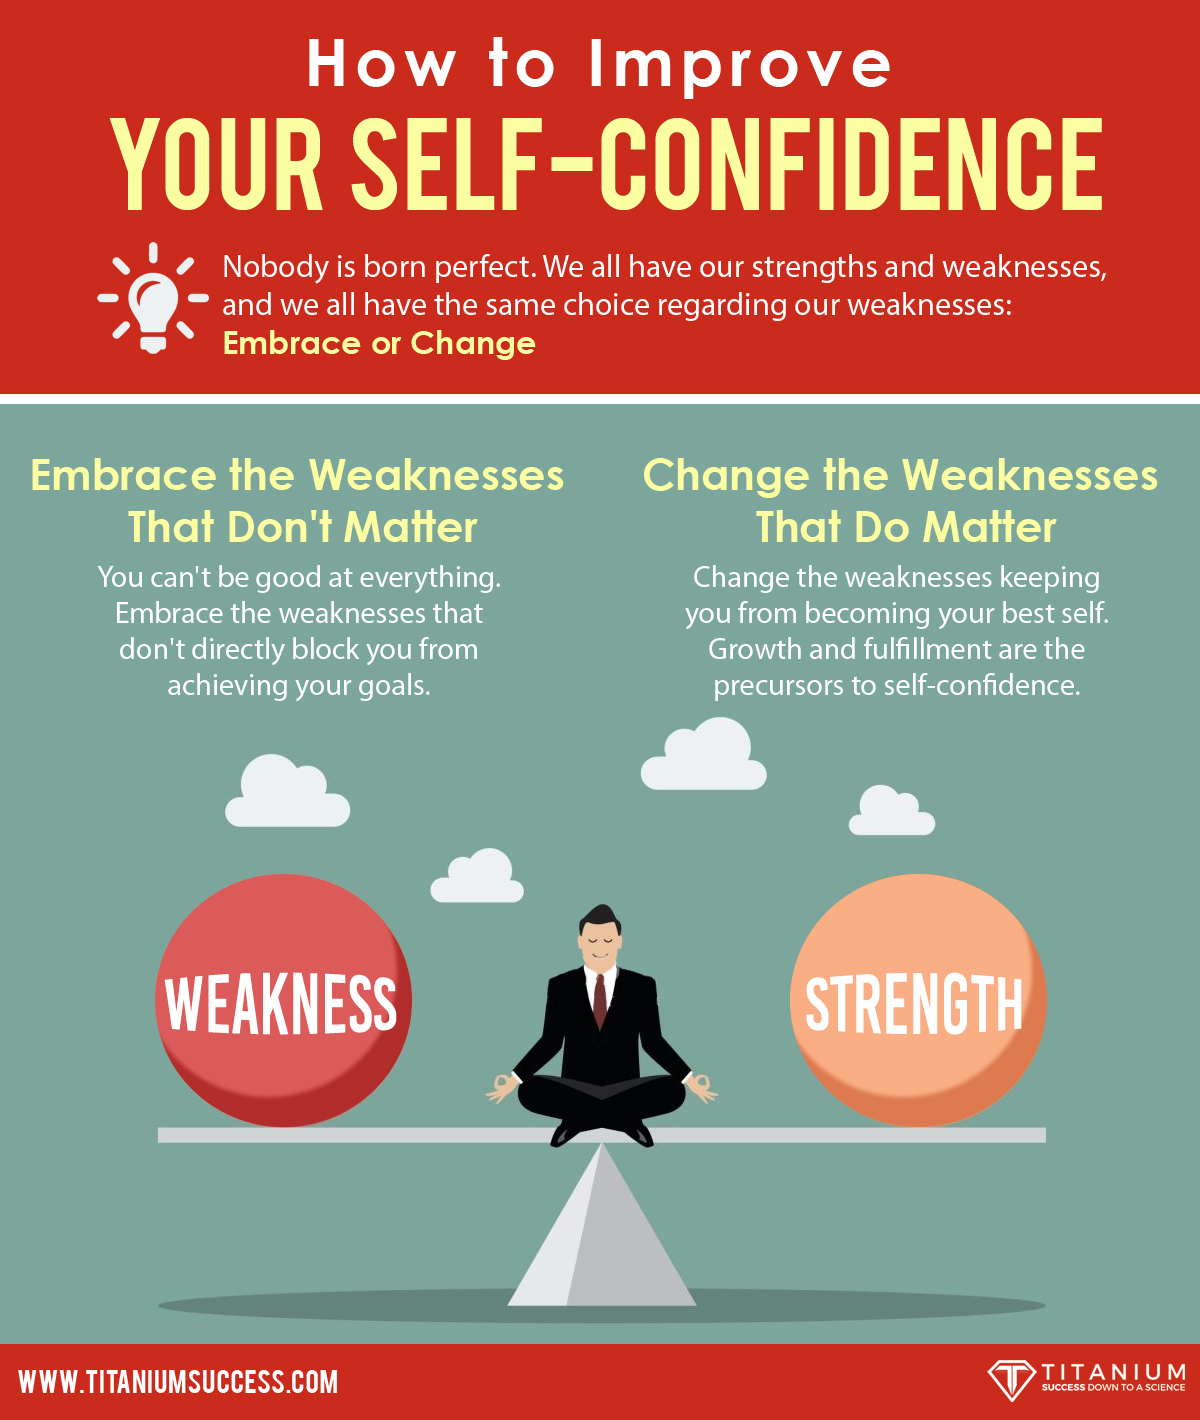 How To Improve Your Self-Confidence Infographic - Ts